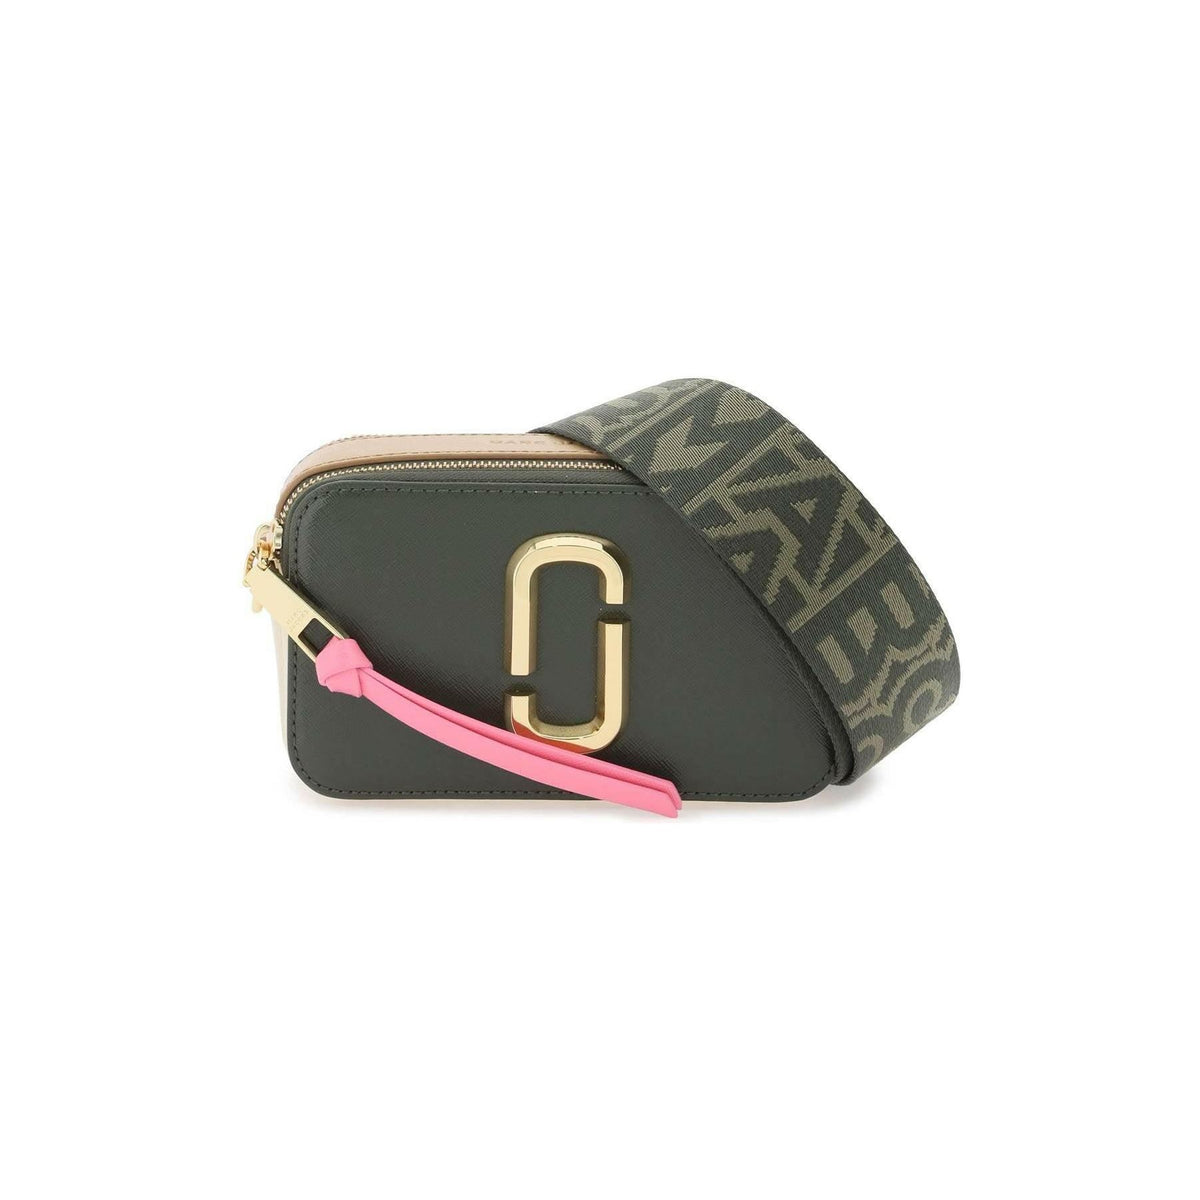 Forest Green and Pink Multi The Snapshot Camera Bag MARC JACOBS JOHN JULIA.